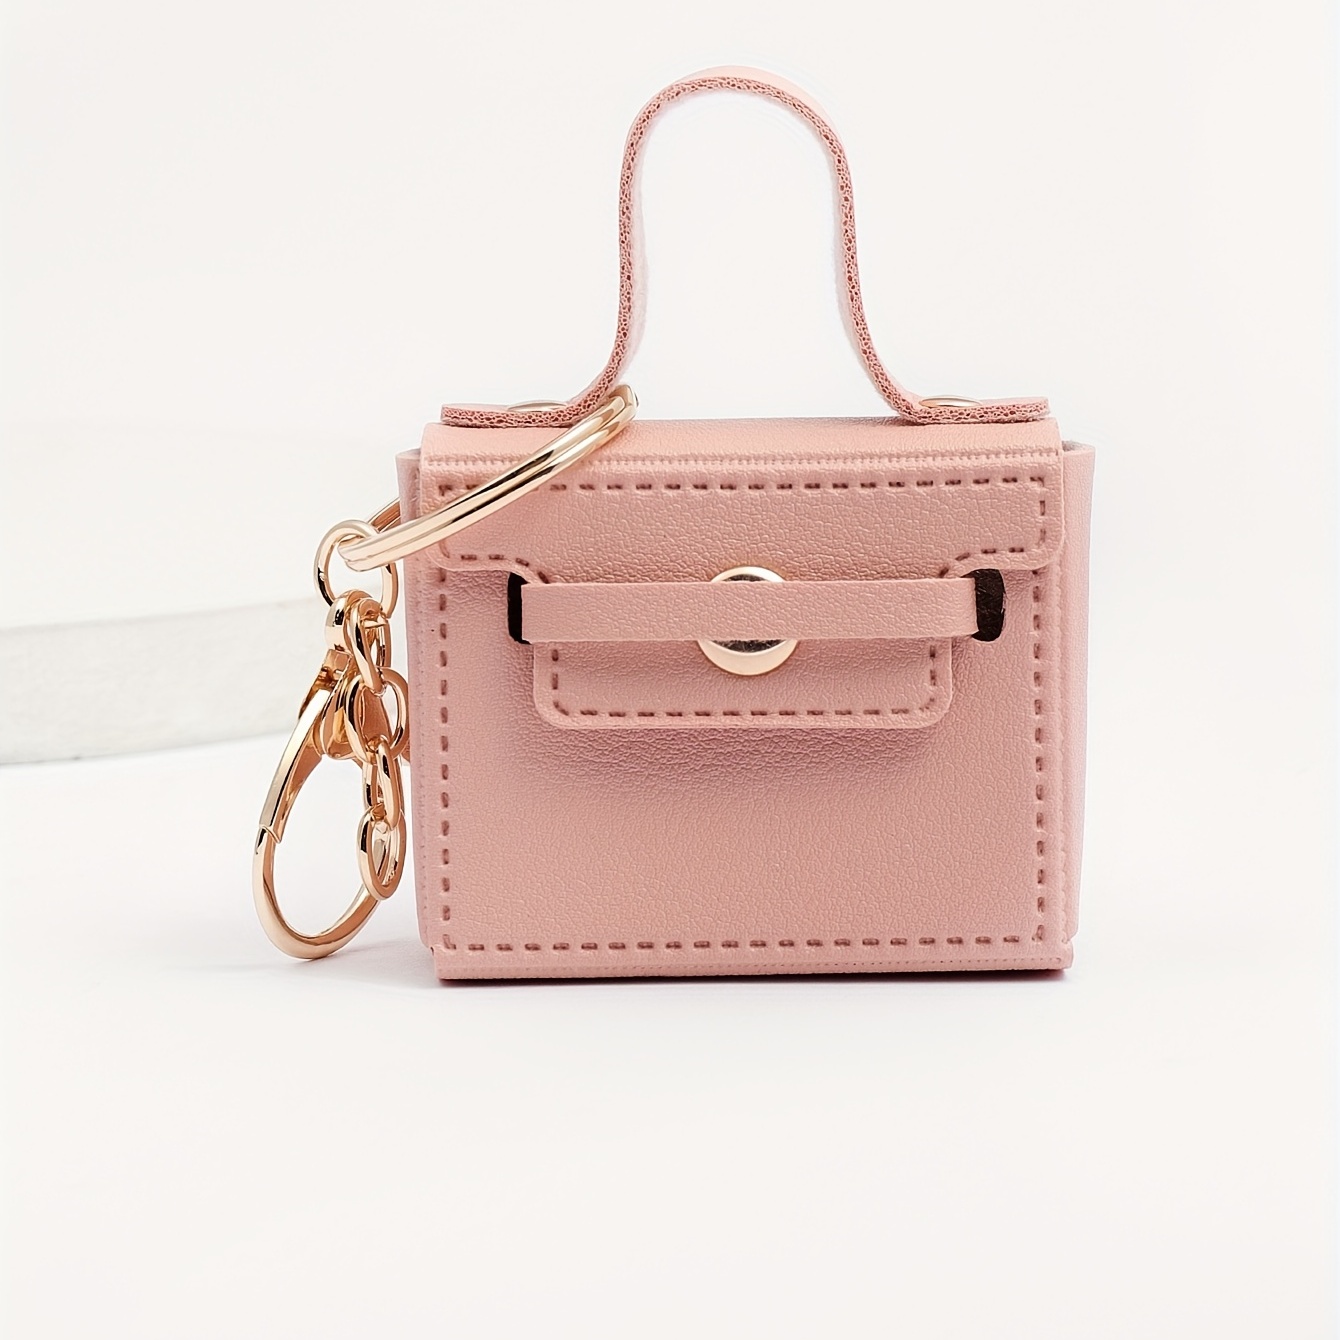 Bag accessories for Women